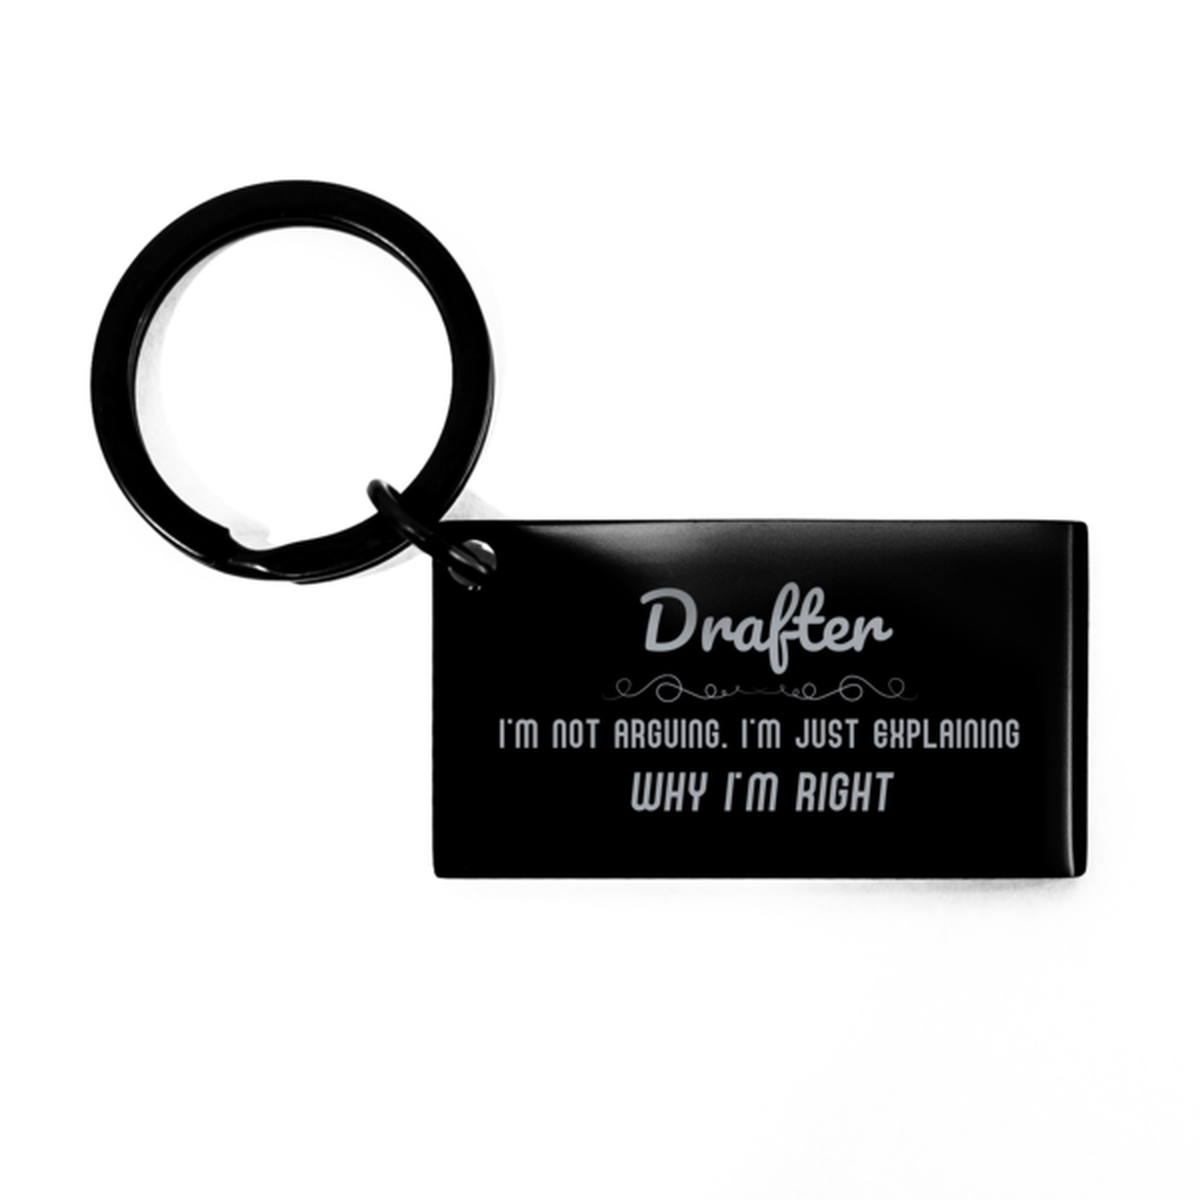 Drafter I'm not Arguing. I'm Just Explaining Why I'm RIGHT Keychain, Funny Saying Quote Drafter Gifts For Drafter Graduation Birthday Christmas Gifts for Men Women Coworker